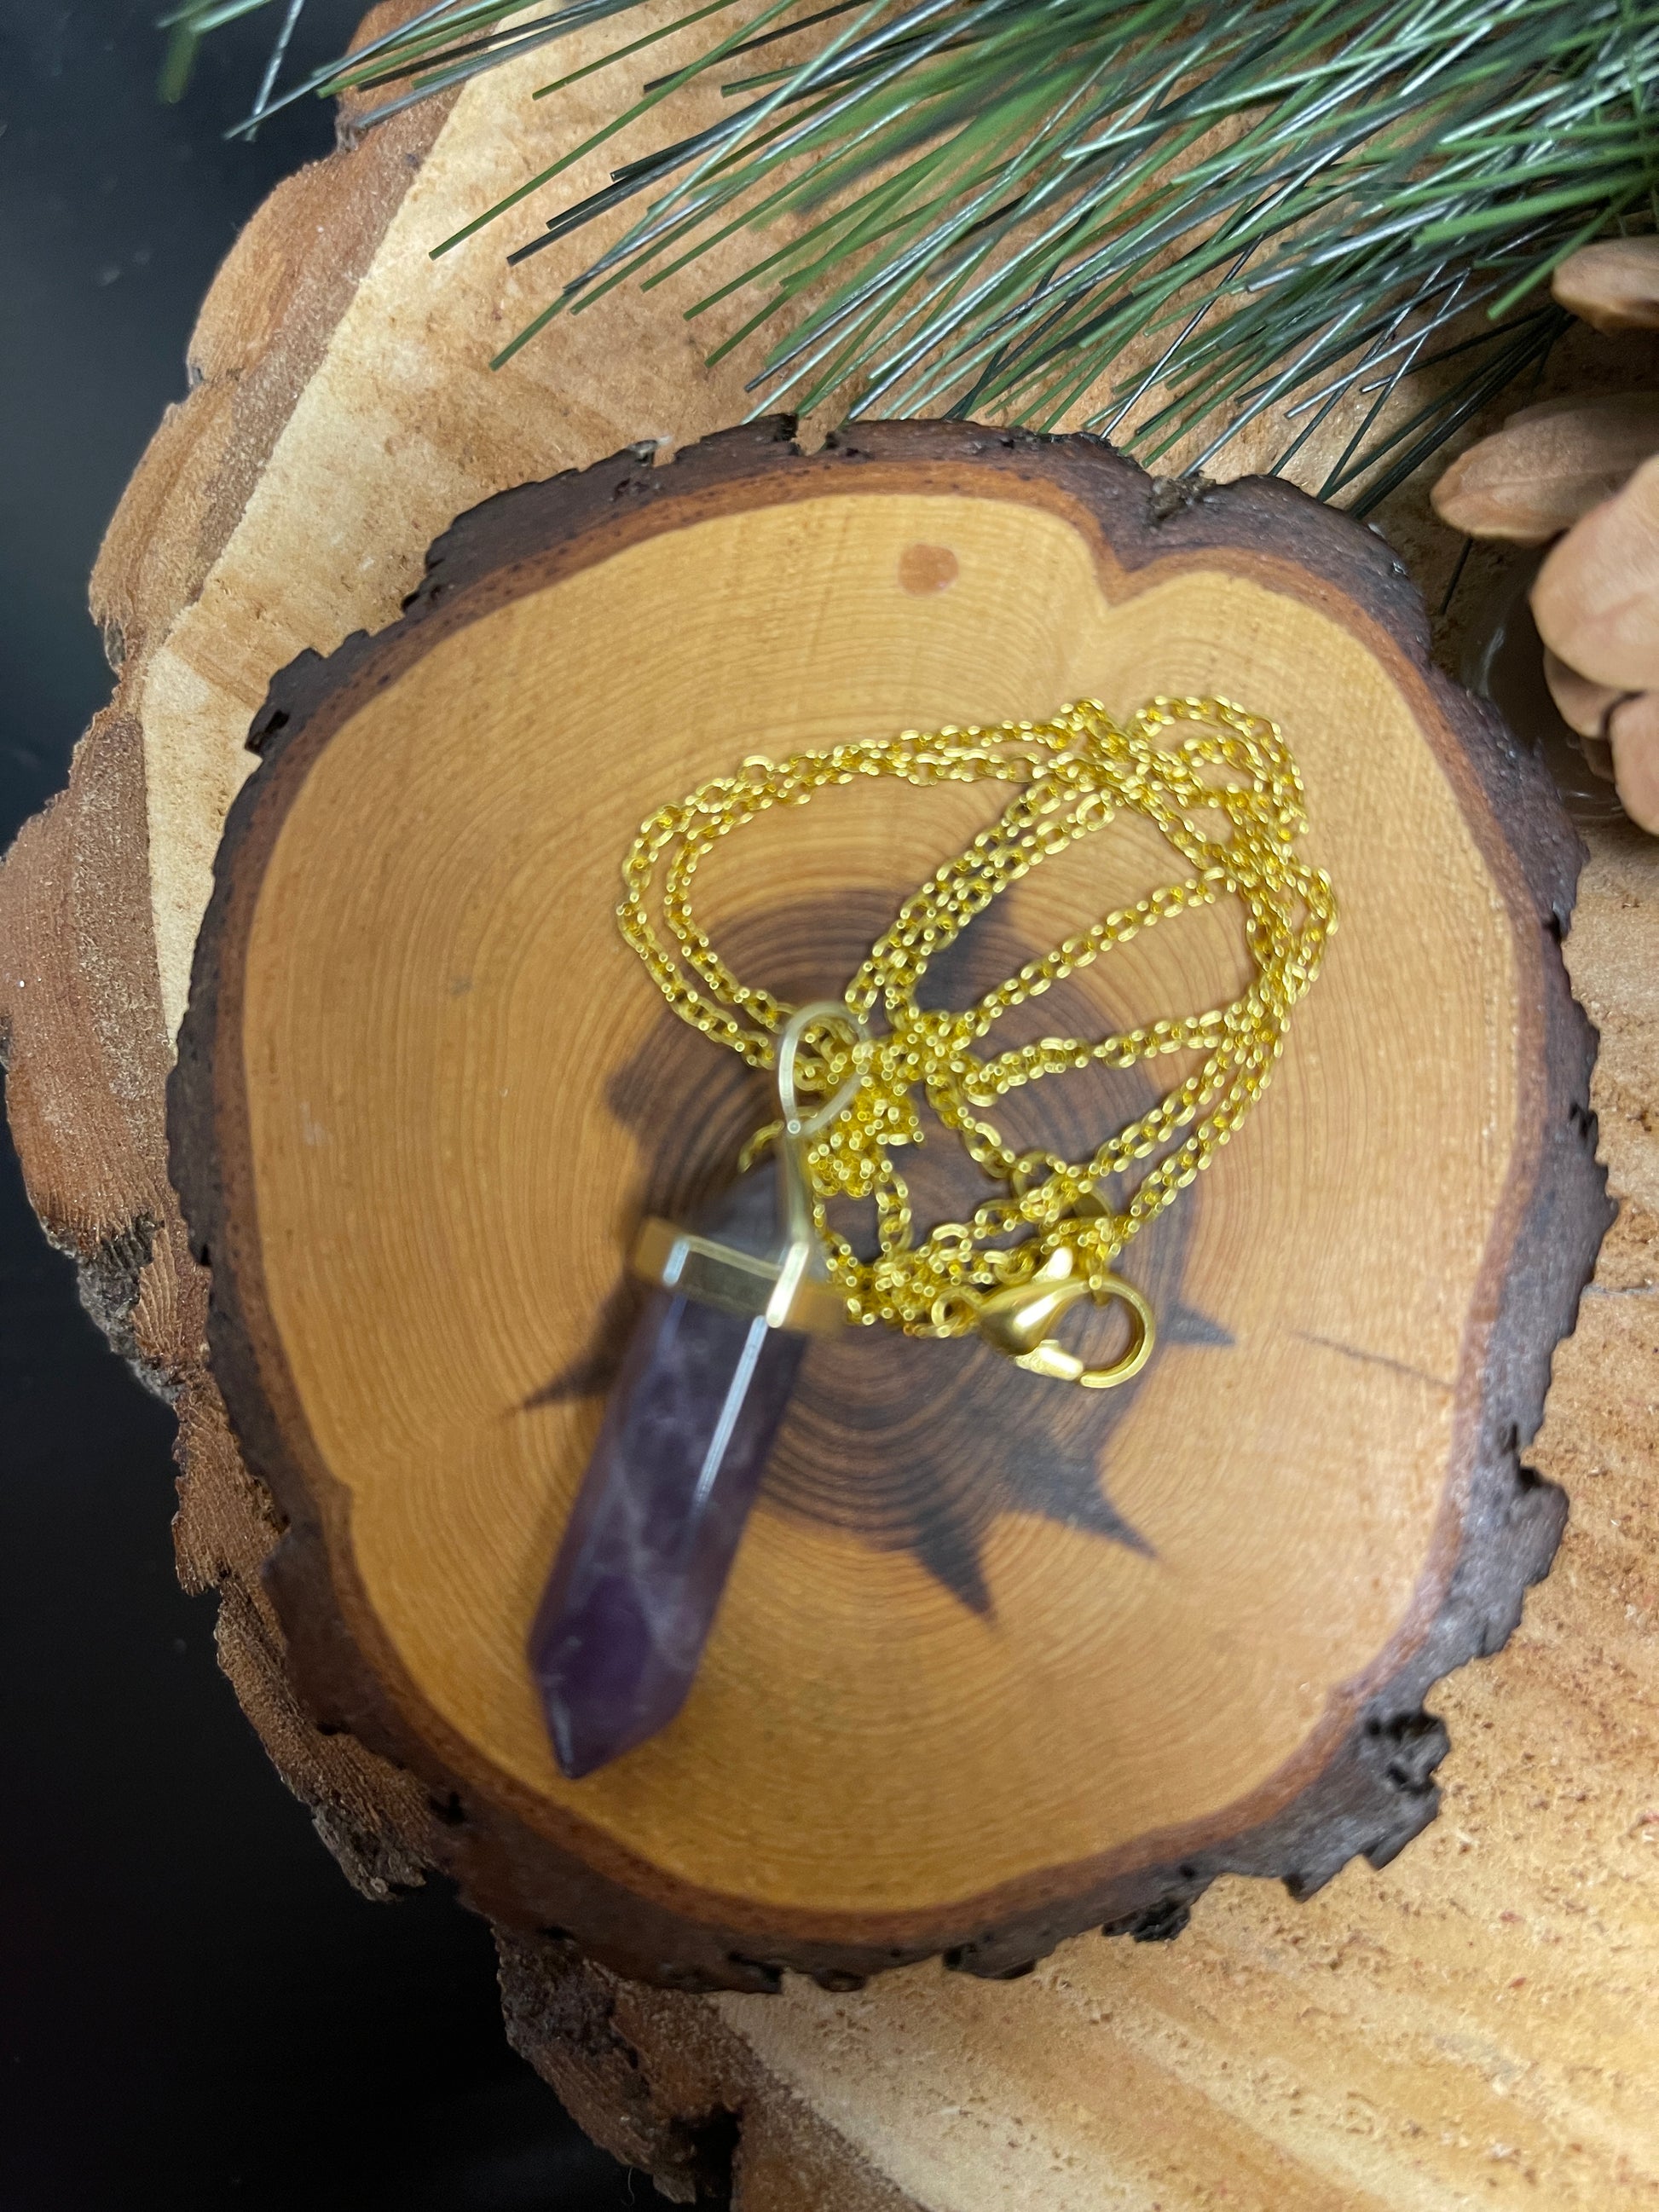 Amethyst  Pendulum Pendant on a Gold chain NecklacePink tiful of LOVE